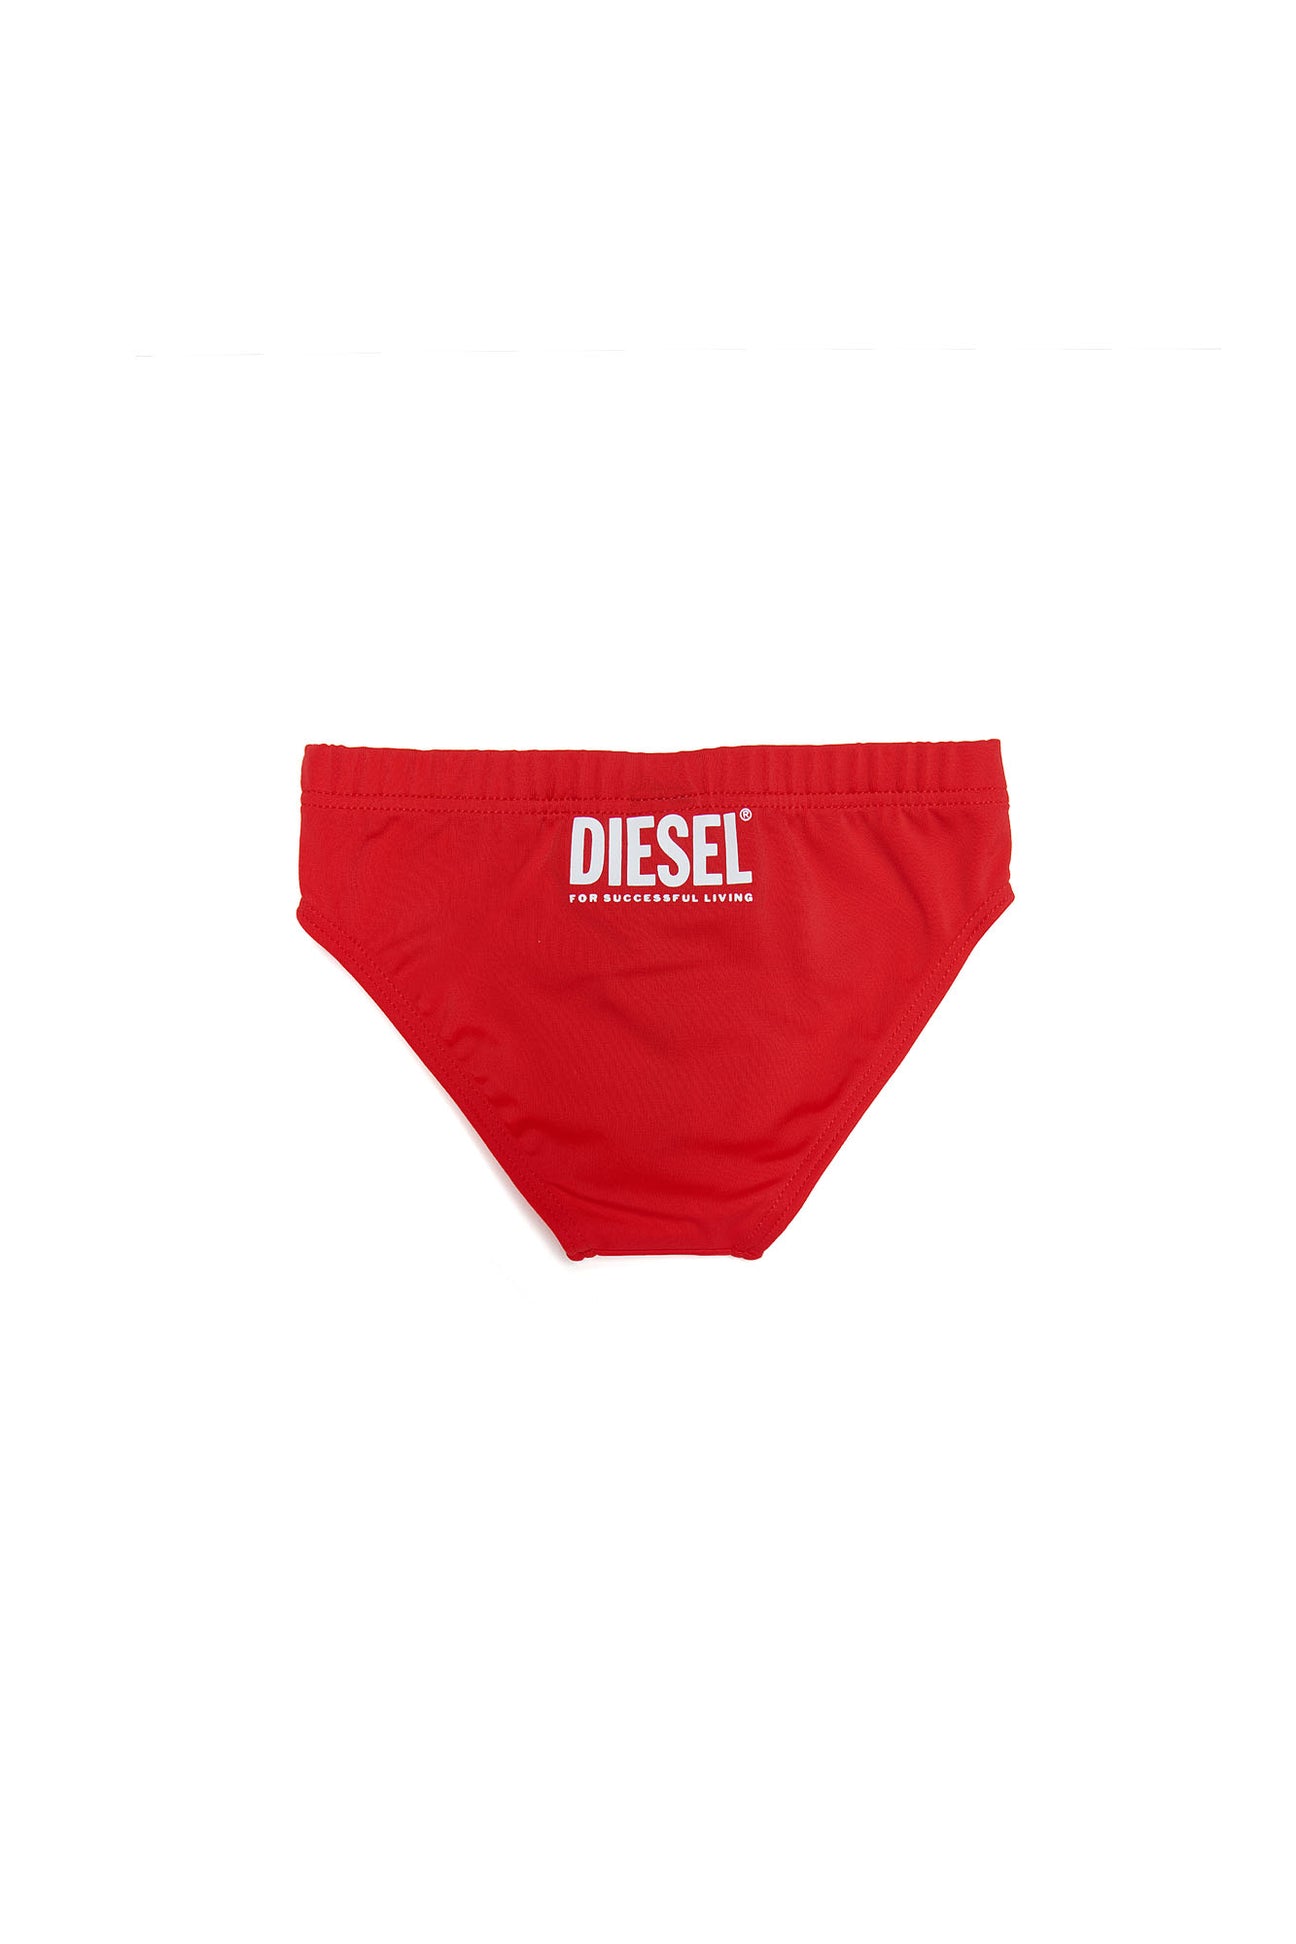 Red lycra brief costume with logo Red lycra brief costume with logo